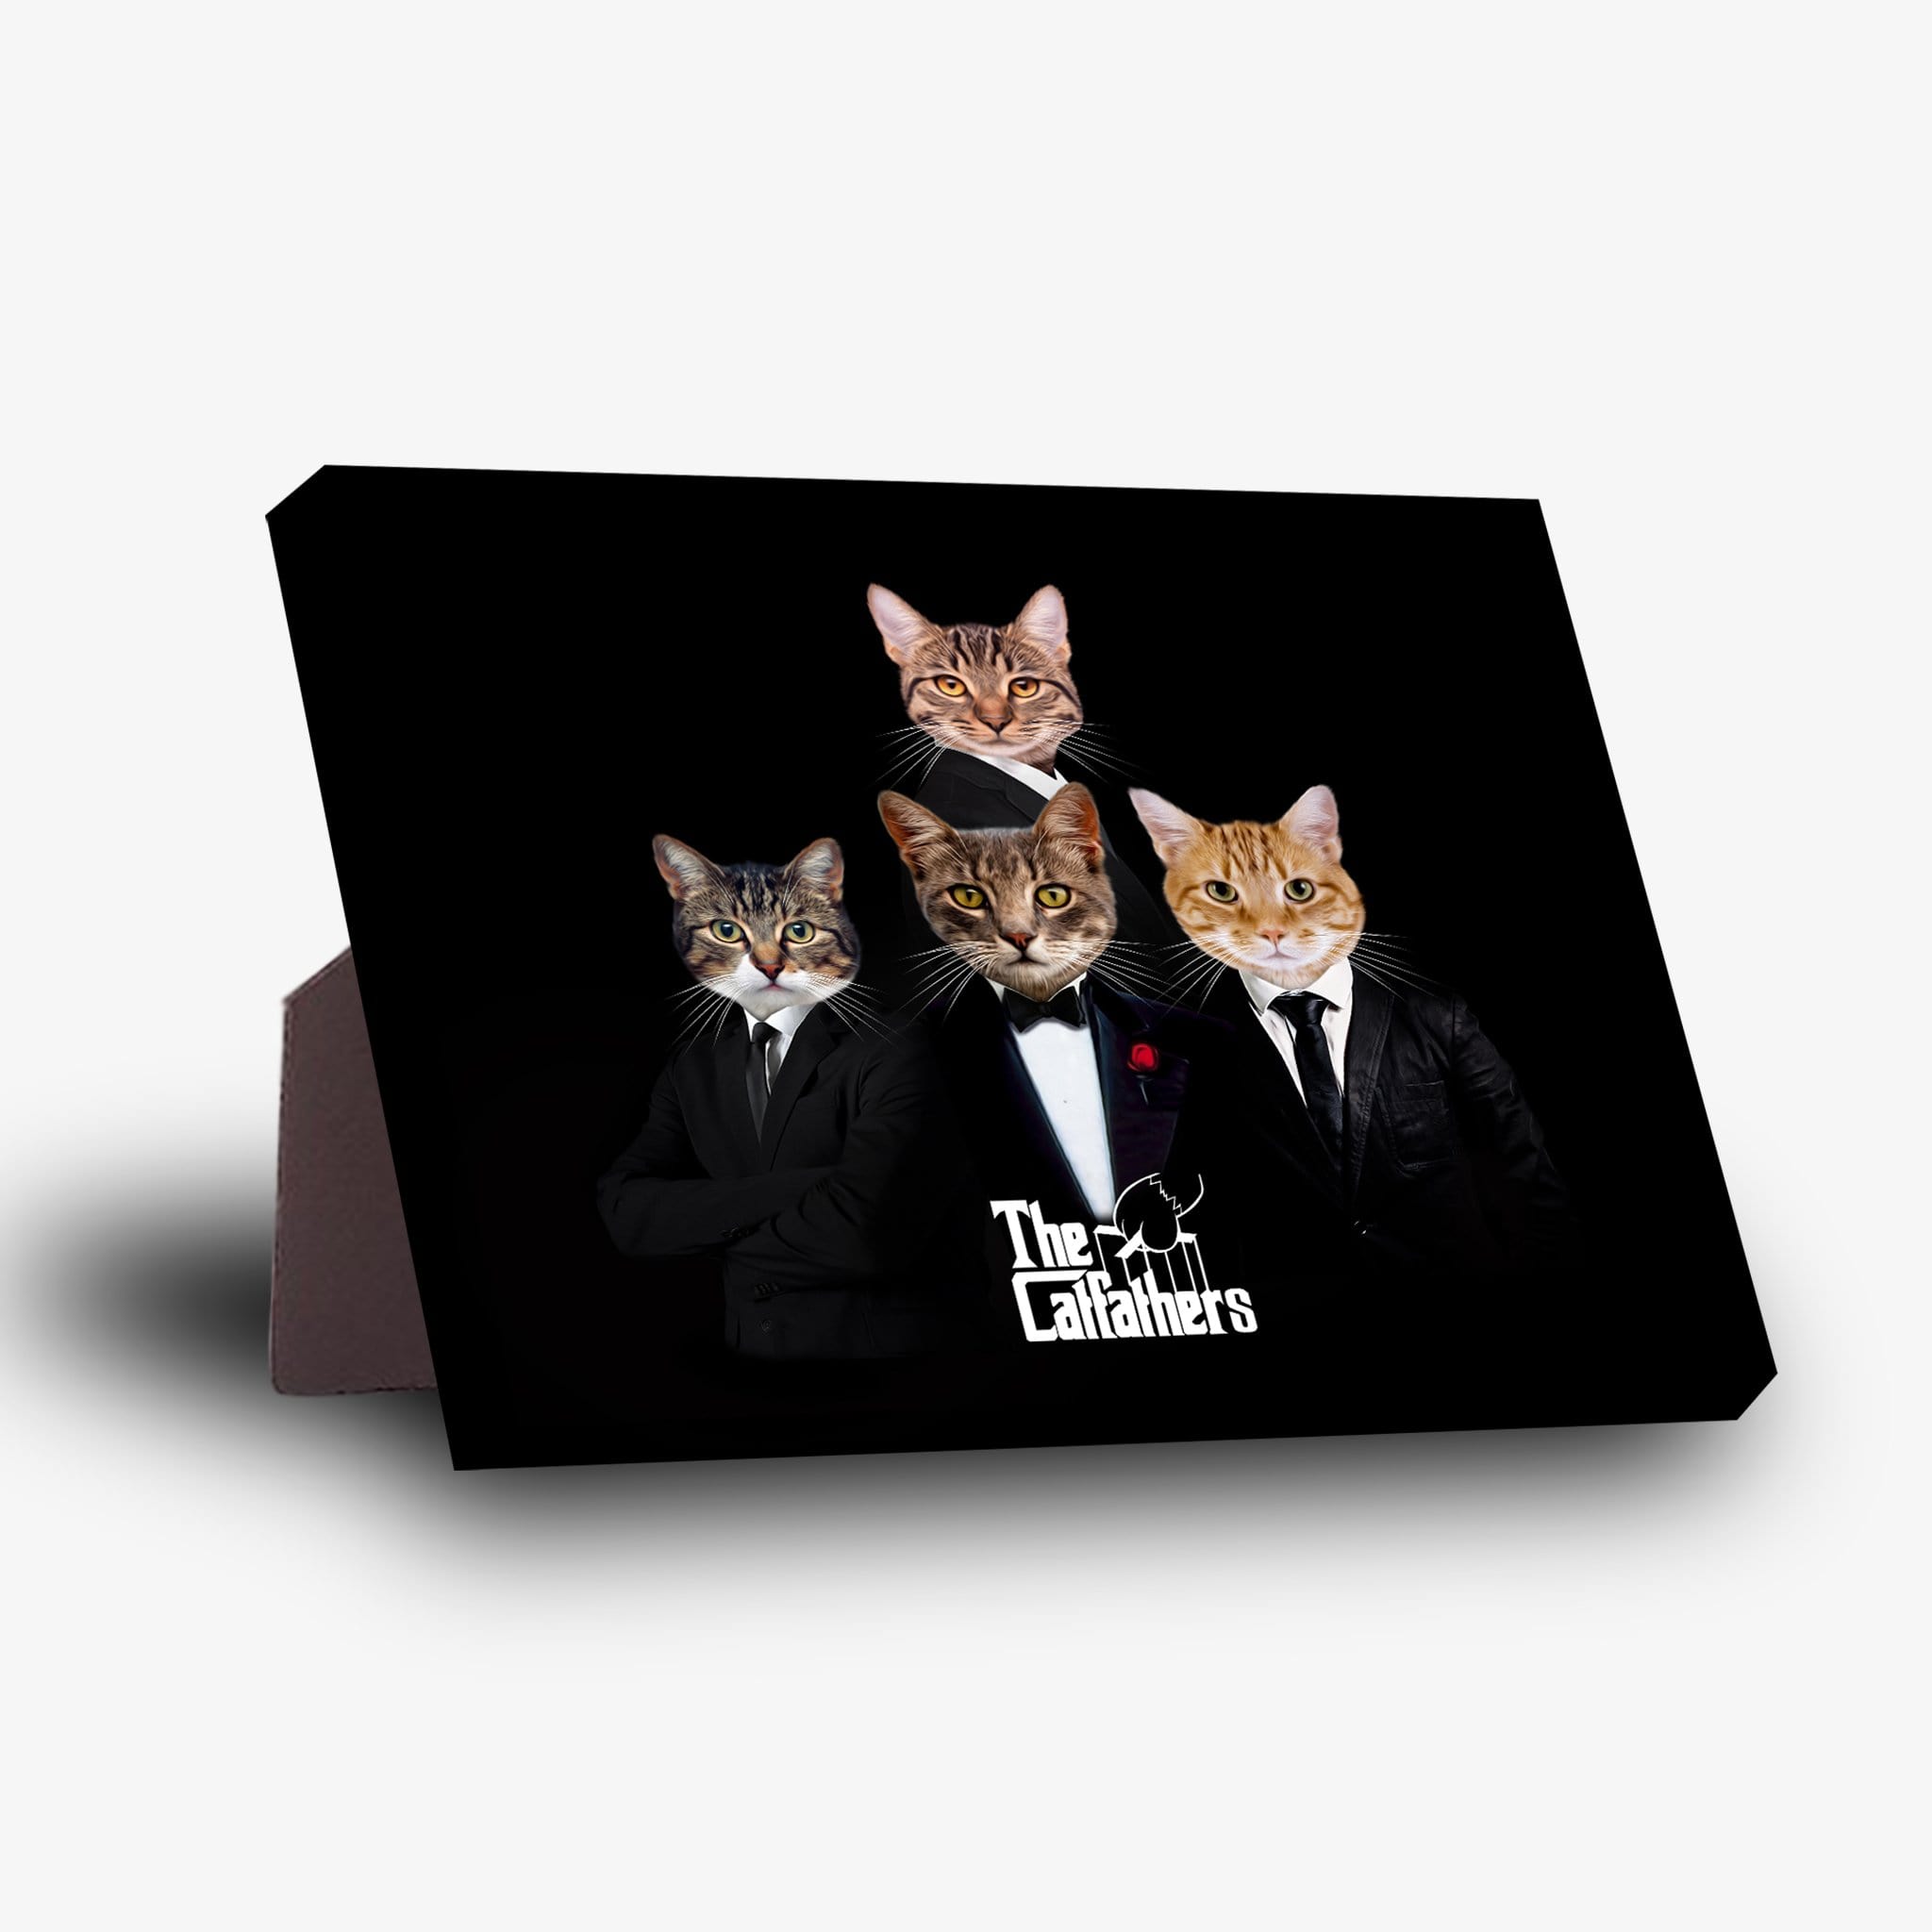 'The Catfathers' Personalized 4 Pet Standing Canvas